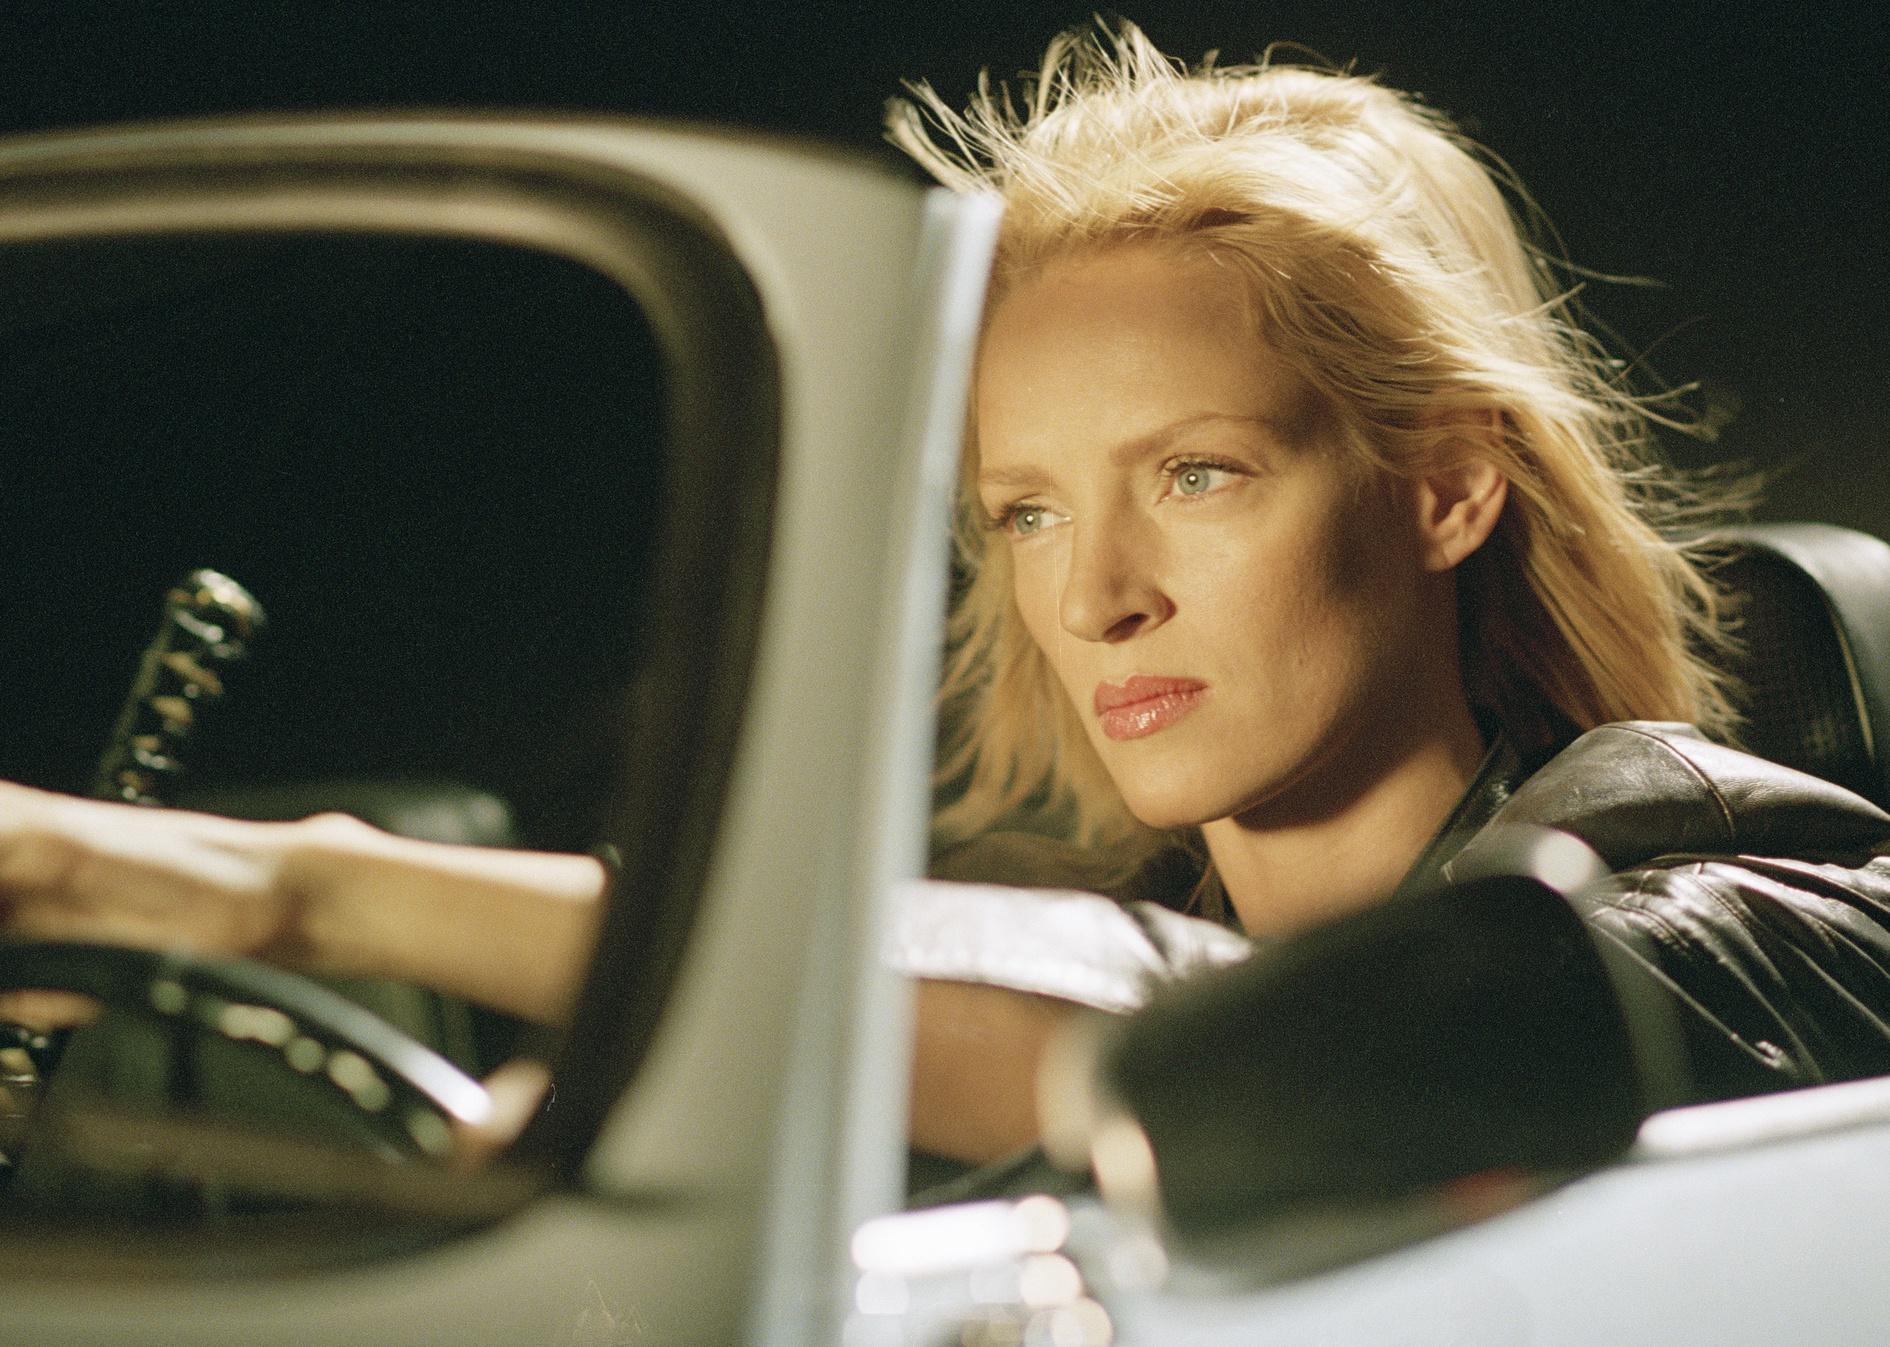 Uma Thurman driving a classic convertible with her hair blowing in the wind.